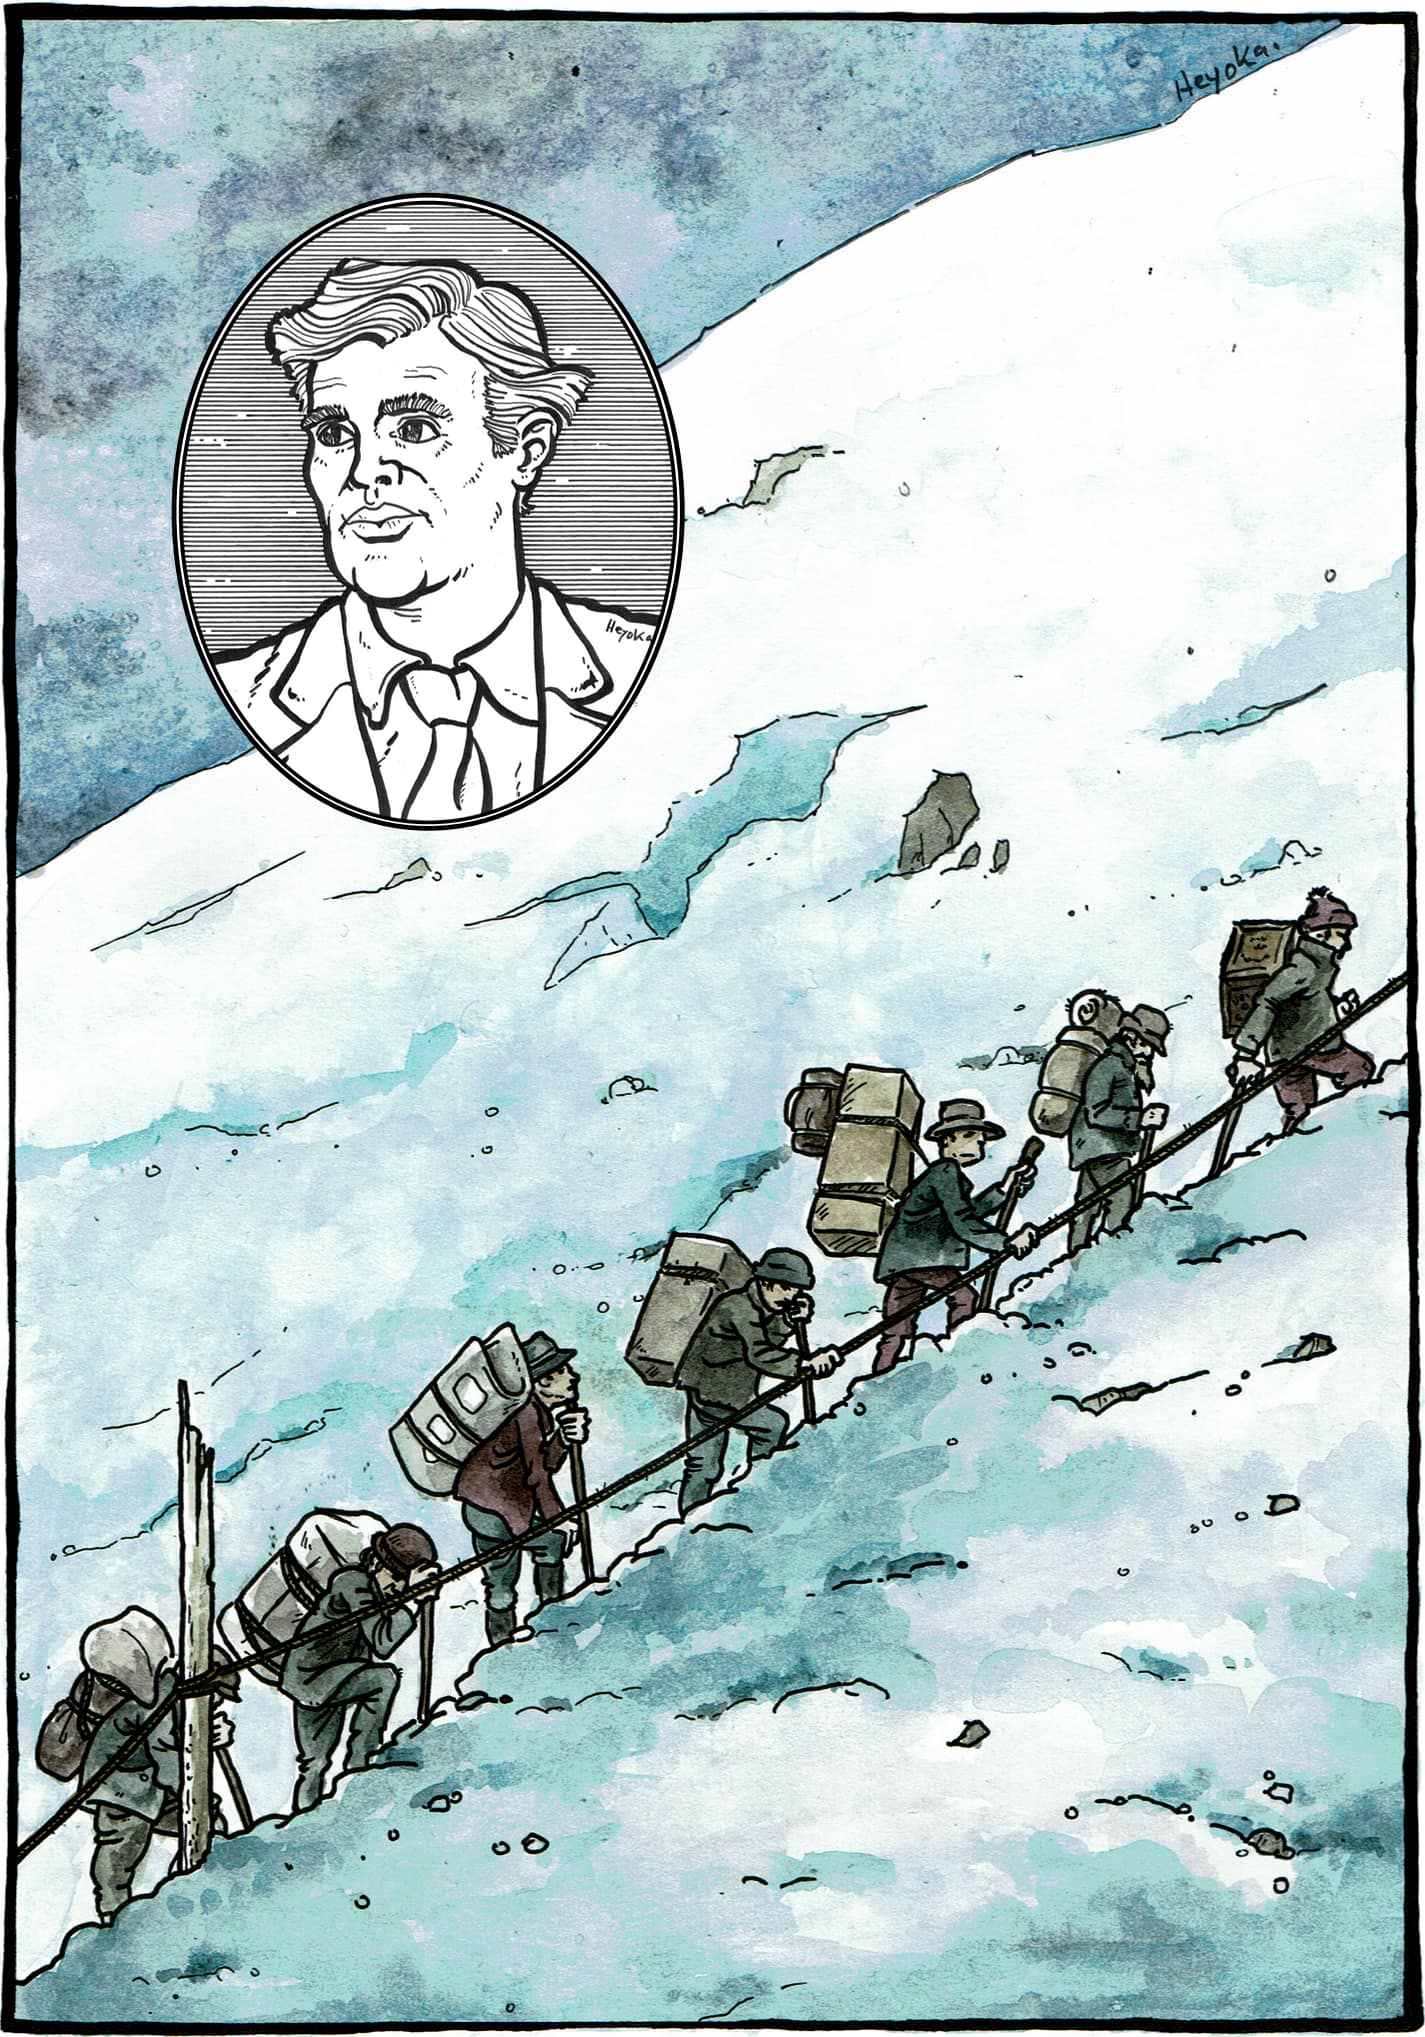 Watercolour picture showing gold prospectors ascending a snow-covered mountain ridge. And a vignette with an inked portrait of Jack London.